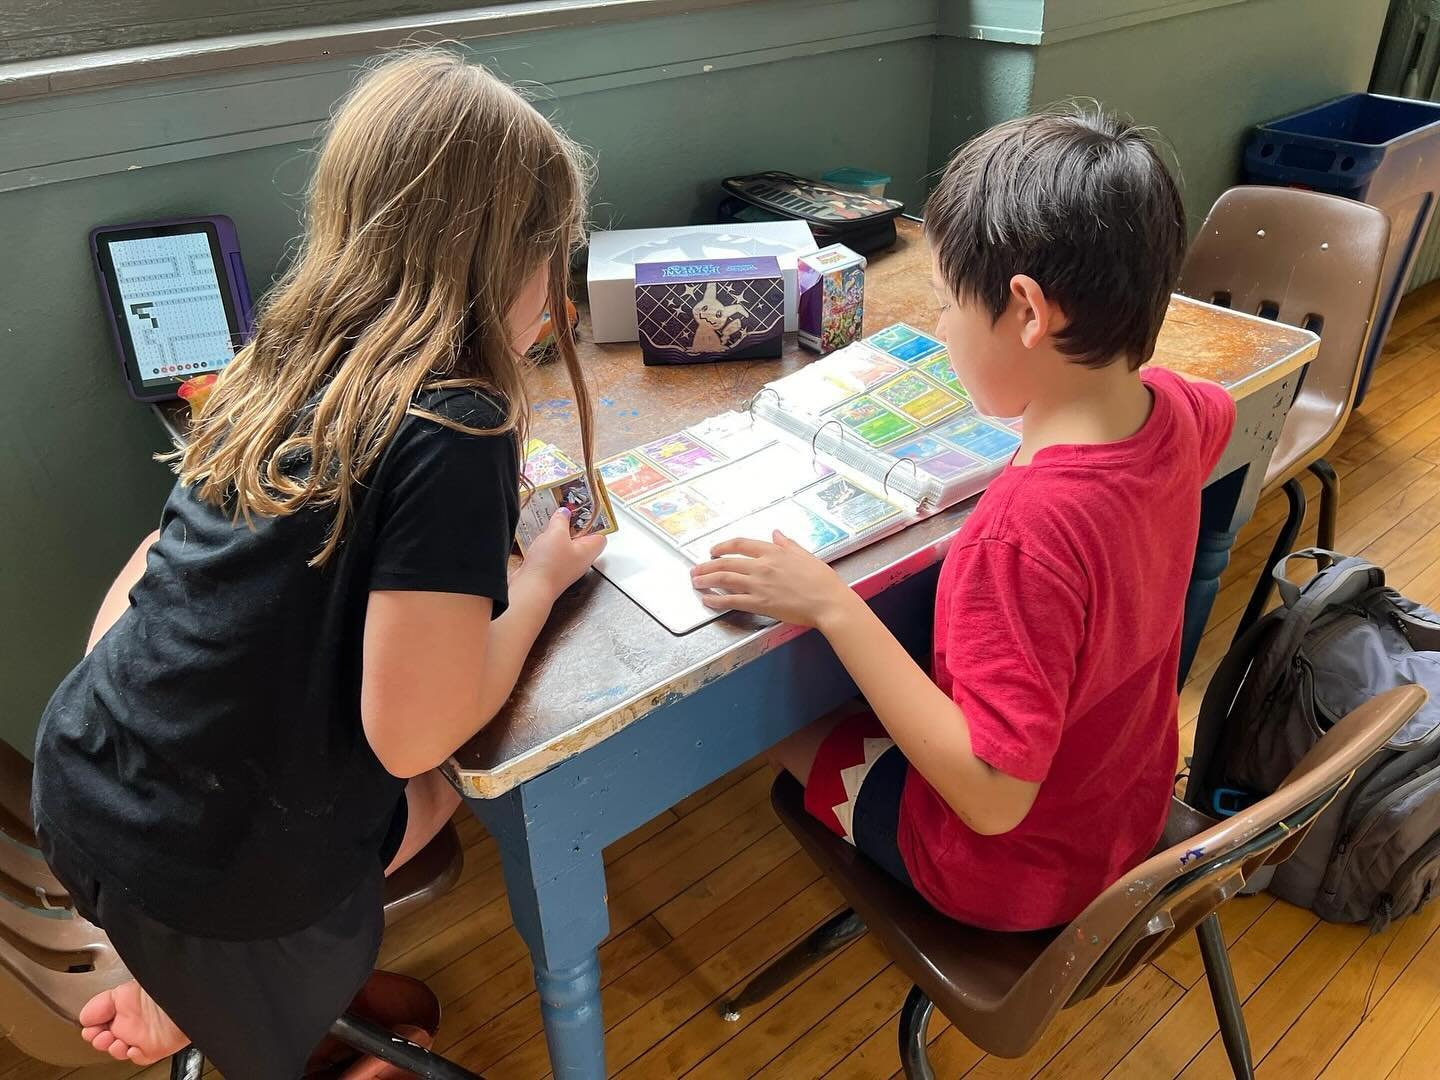 Sudbury moment! 😊 Friends sharing their interests together!

Unlike conventional schools, Saint Louis Sudbury School offers students time and space to let connections, conversations, and learning unfold and grow at a pace that feels right for each i